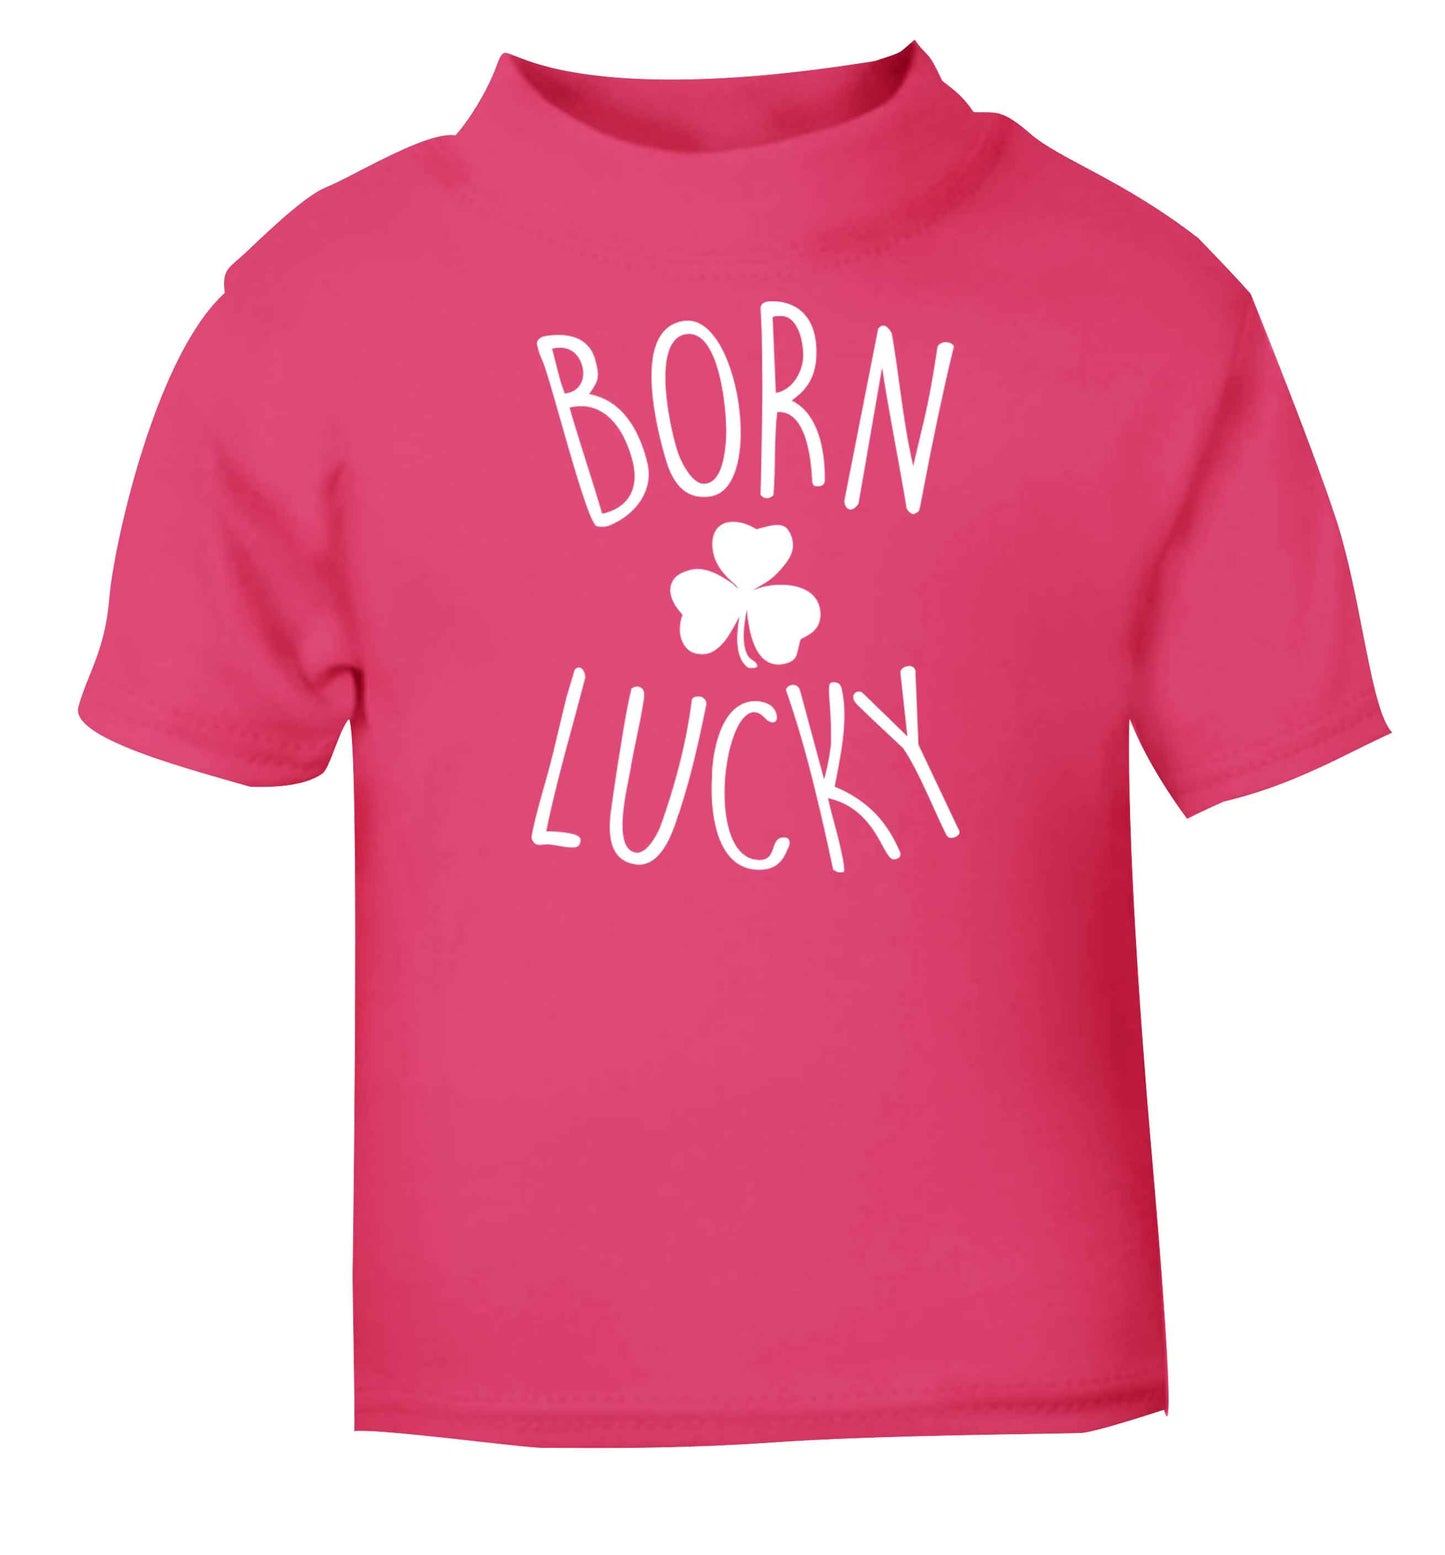 Born Lucky pink baby toddler Tshirt 2 Years